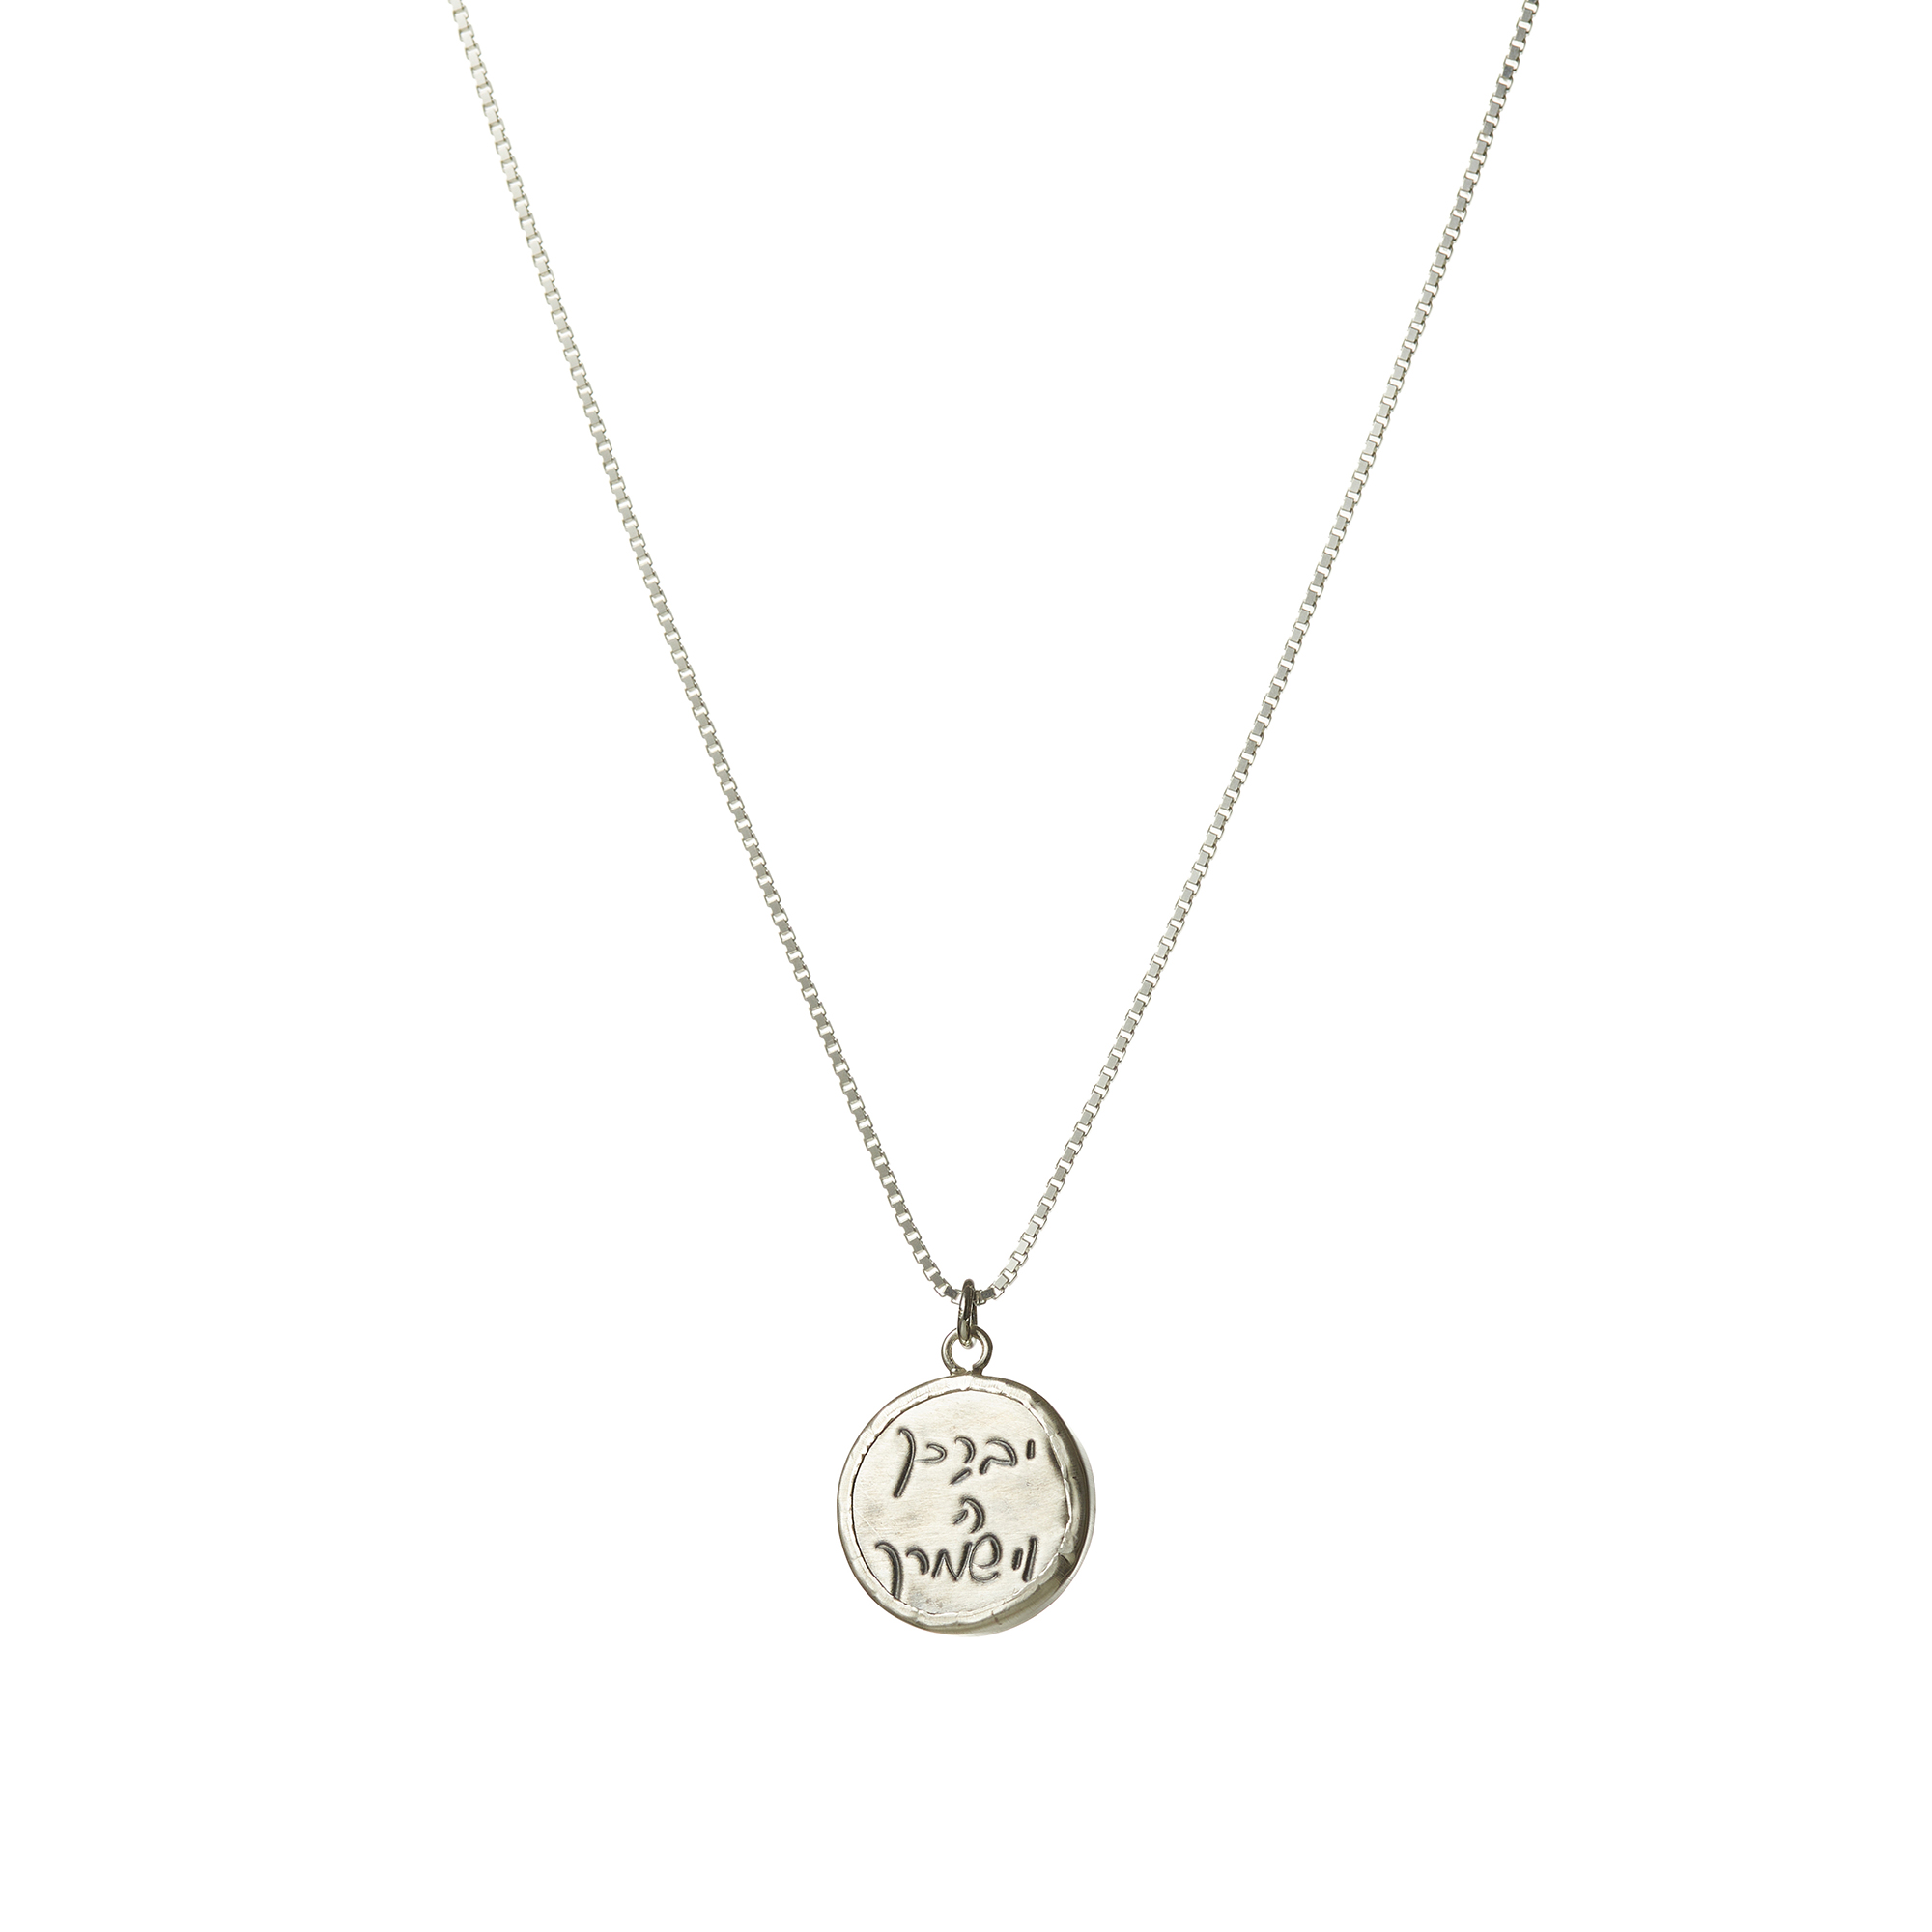 “The Priestly Blessing” Pendant With Chain (silver)